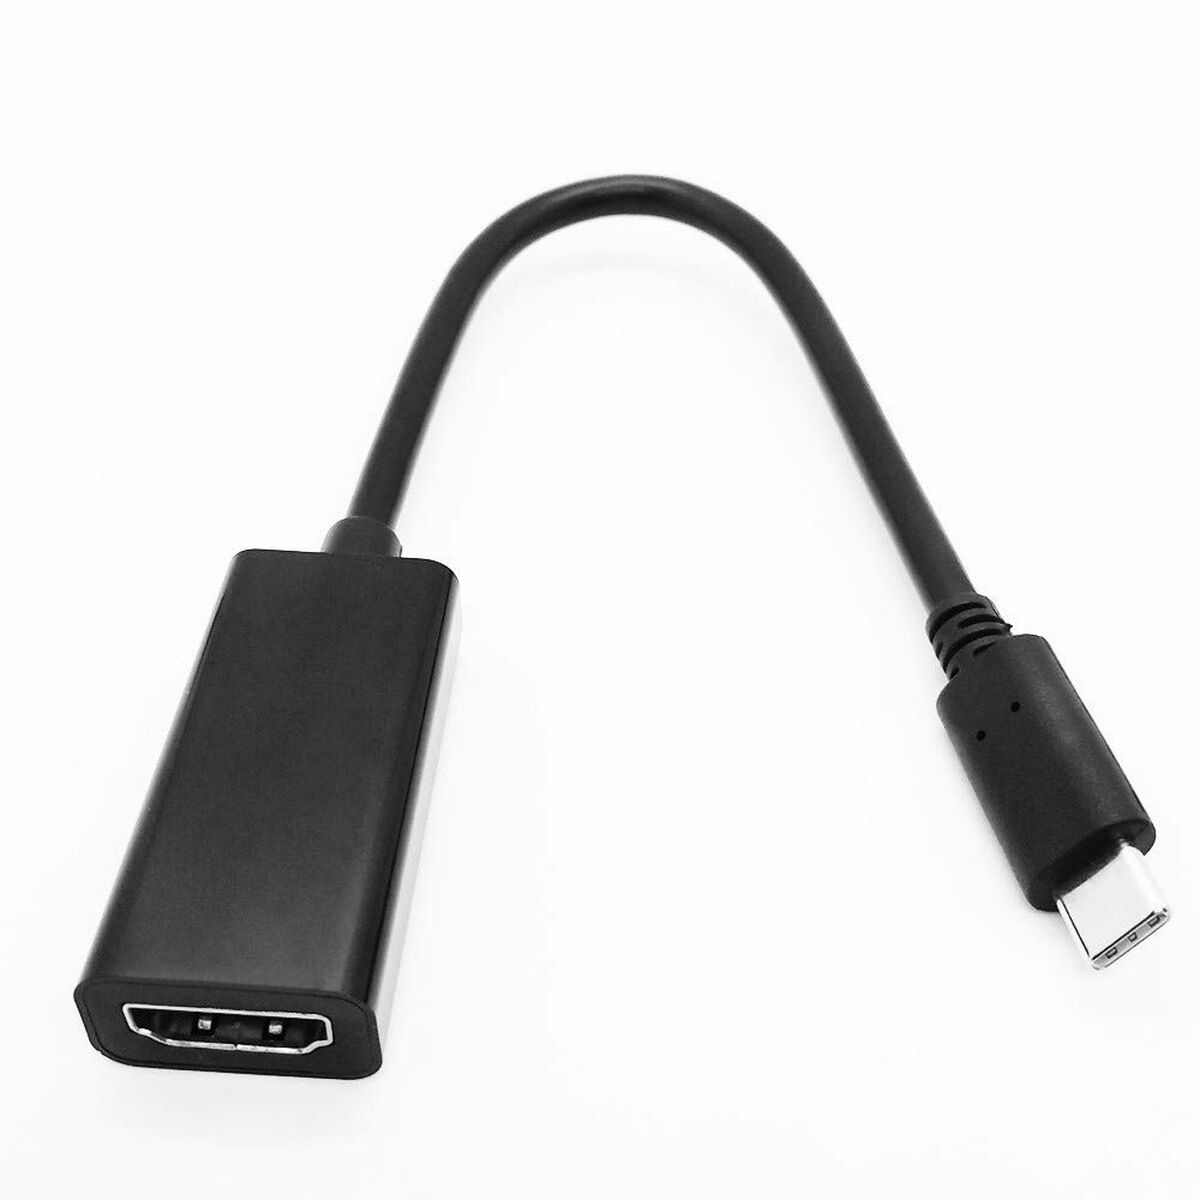 USB-C to HDMI Cable Black (Refurbished A+)